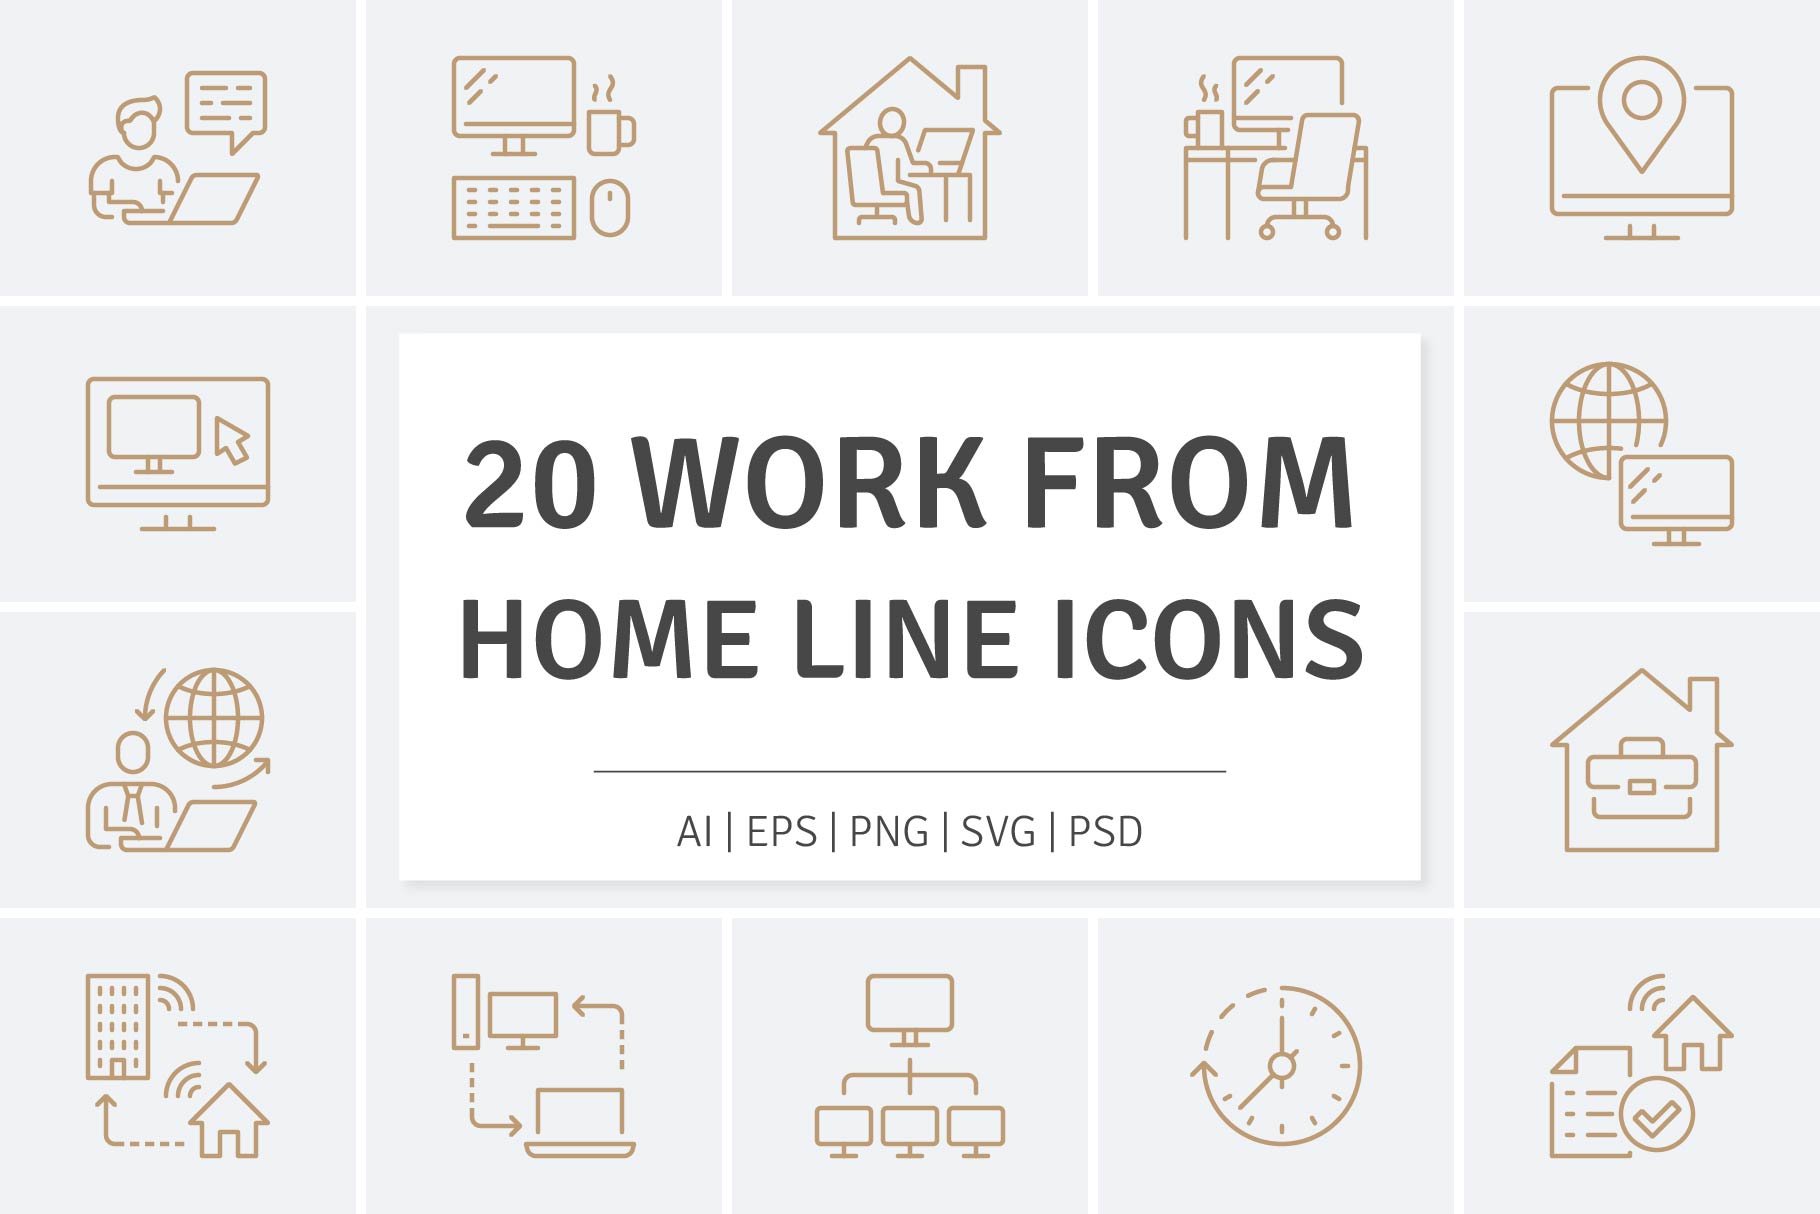 Work From Home Line Icons cover image.